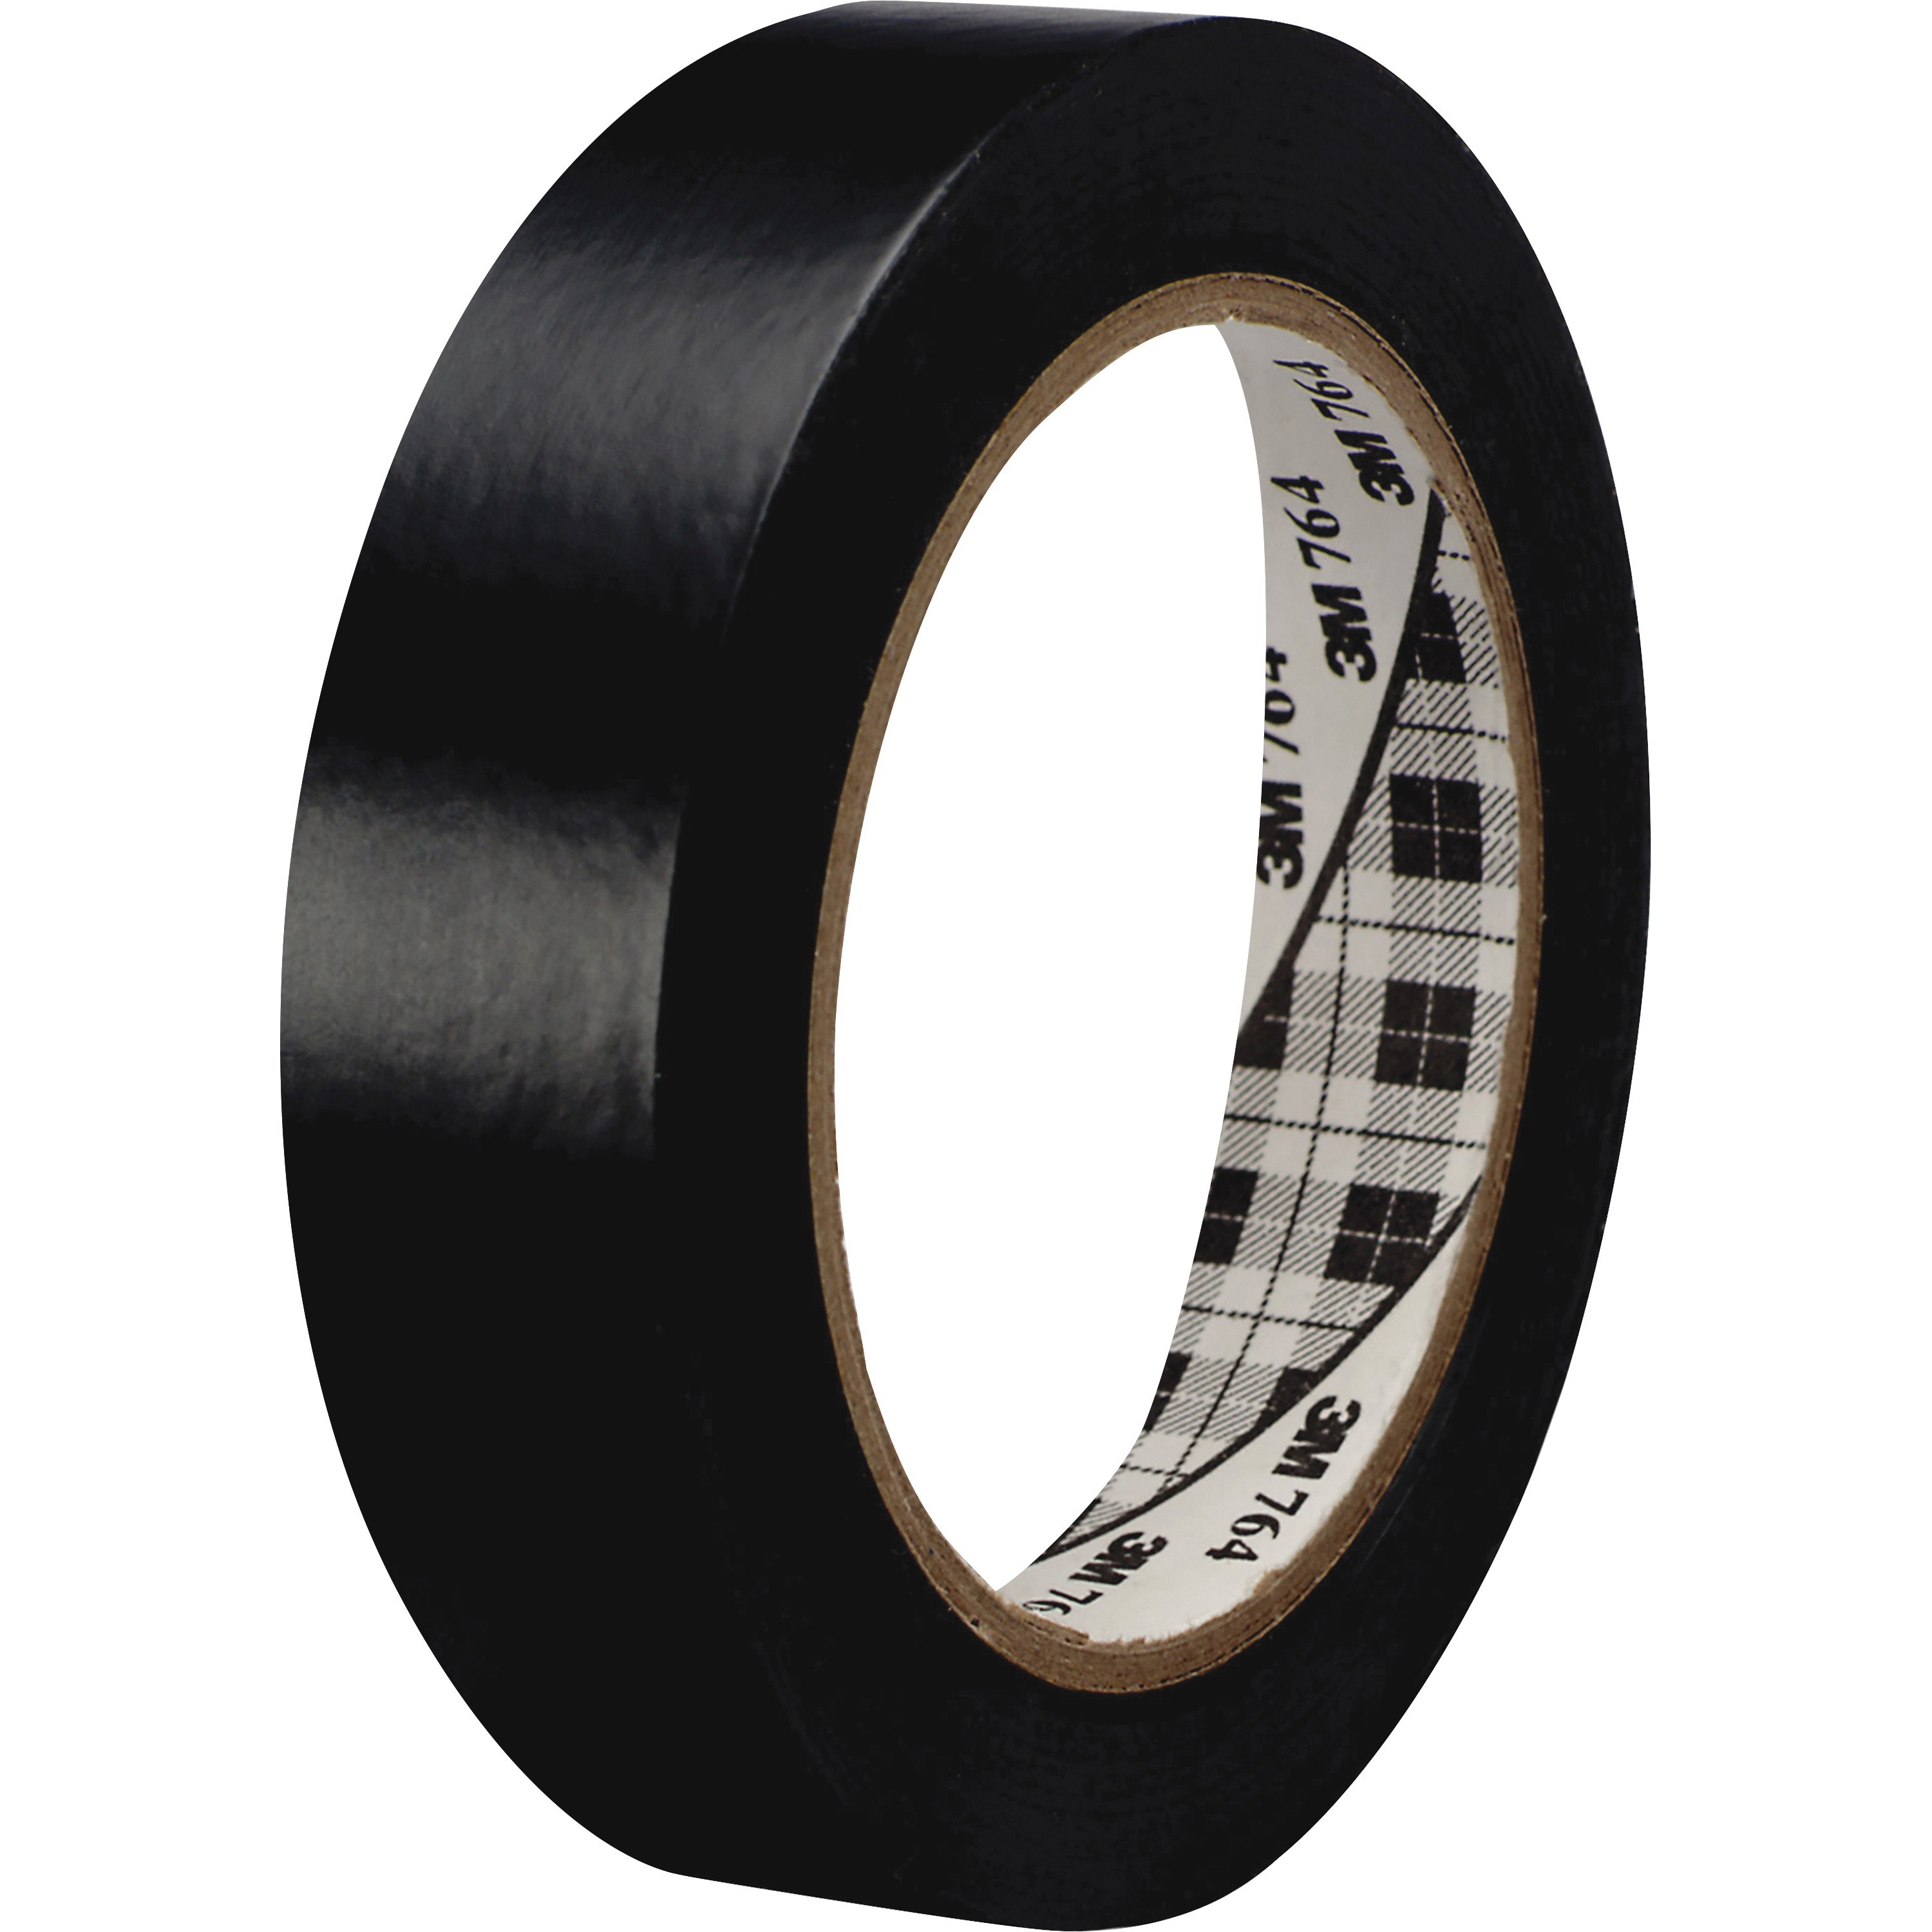 SKILCRAFT Dispensing Double-Sided Tape - Zerbee